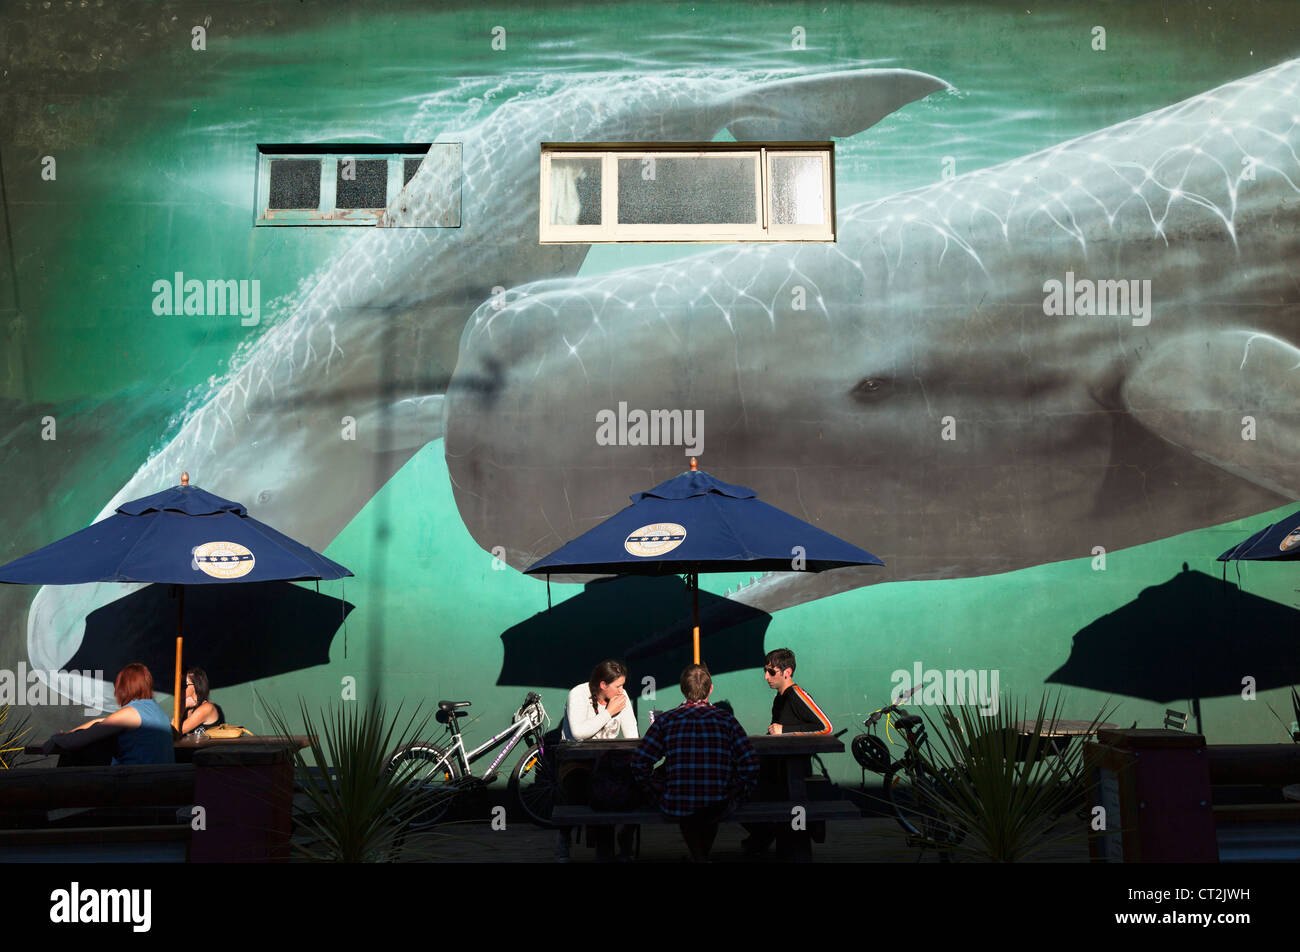 Whale-watching mural at restaurant in Kaikoura, South Island of New Zealand 3 Stock Photo